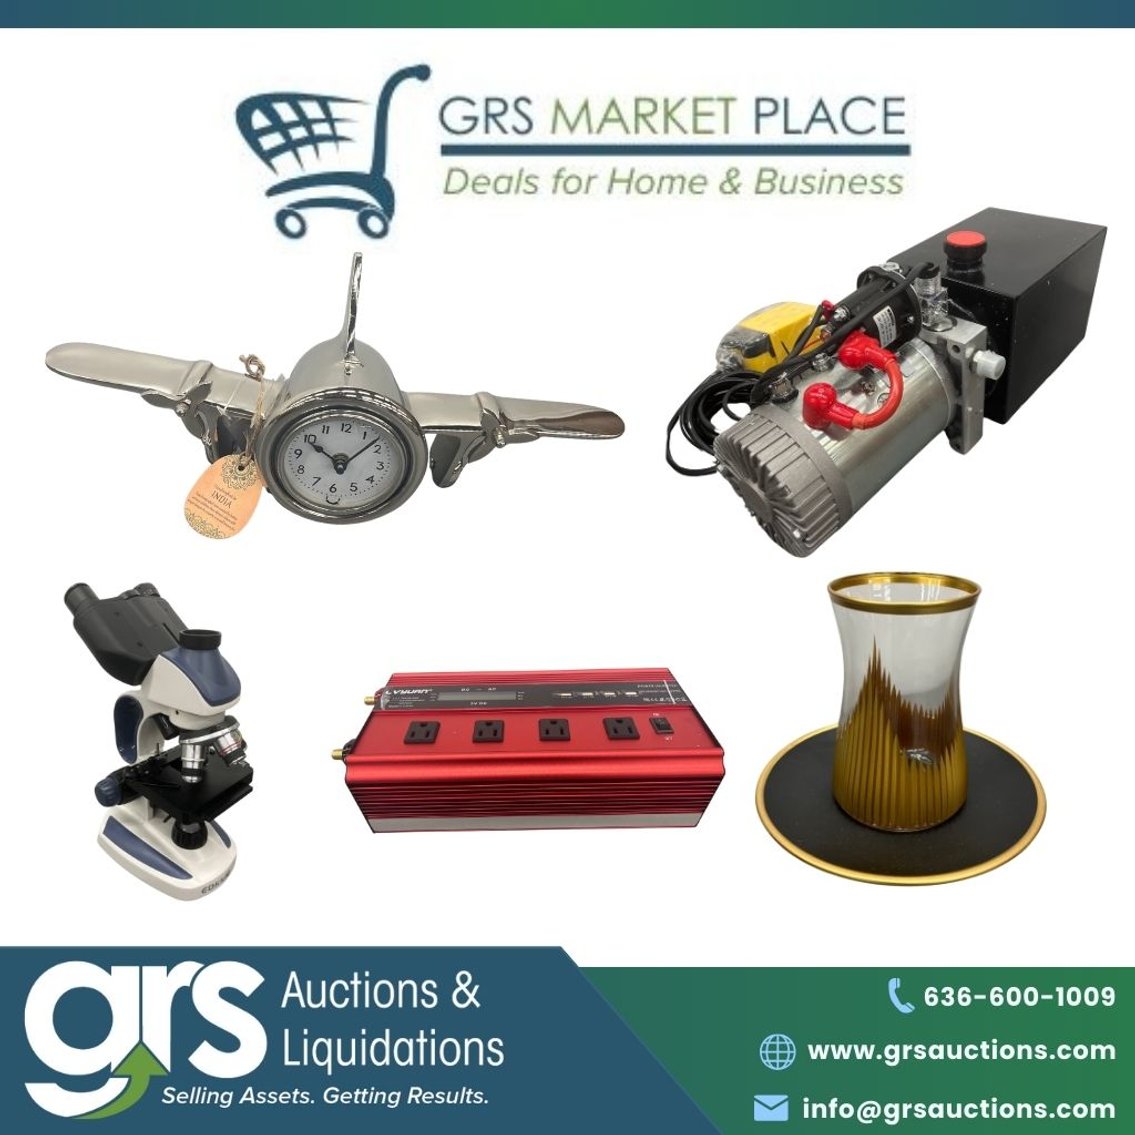 GRS Market Place - Deals for Home and Business